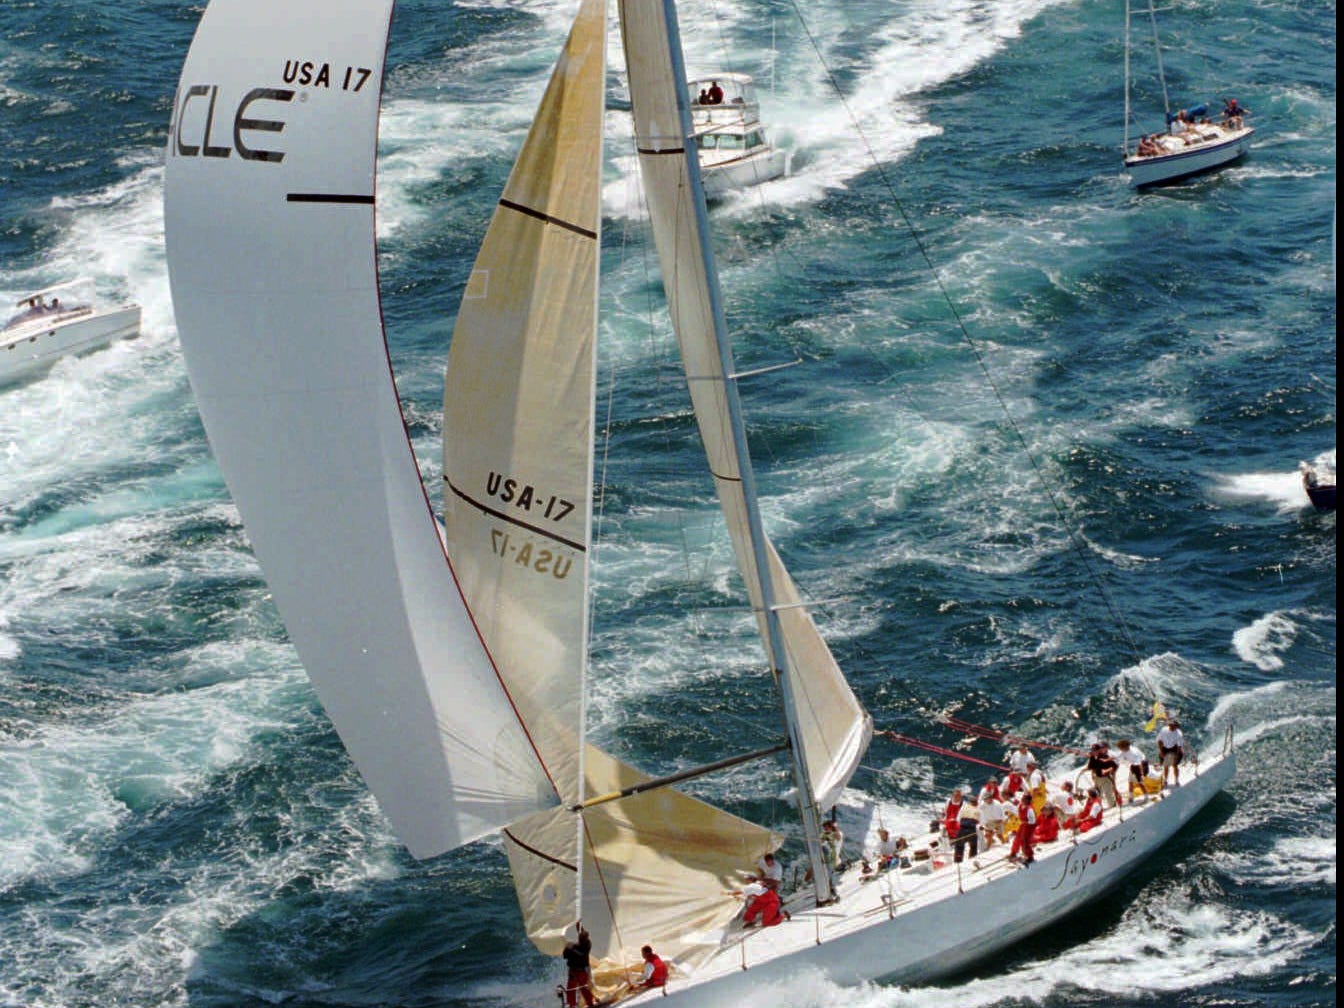 <p>With Ellison as Oracle's major shareholder, his millions kept rolling in. He started to indulge in some expensive hobbies — including yacht racing. That's Ellison at the helm during a 1995 race.</p><p>He also partly financed the BMW Oracle USA sailing team, which won the America's Cup in 2010, according to <a href="https://www.bloomberg.com/billionaires/profiles/lawrence-j-ellison/" rel="noopener">Bloomberg.</a></p>